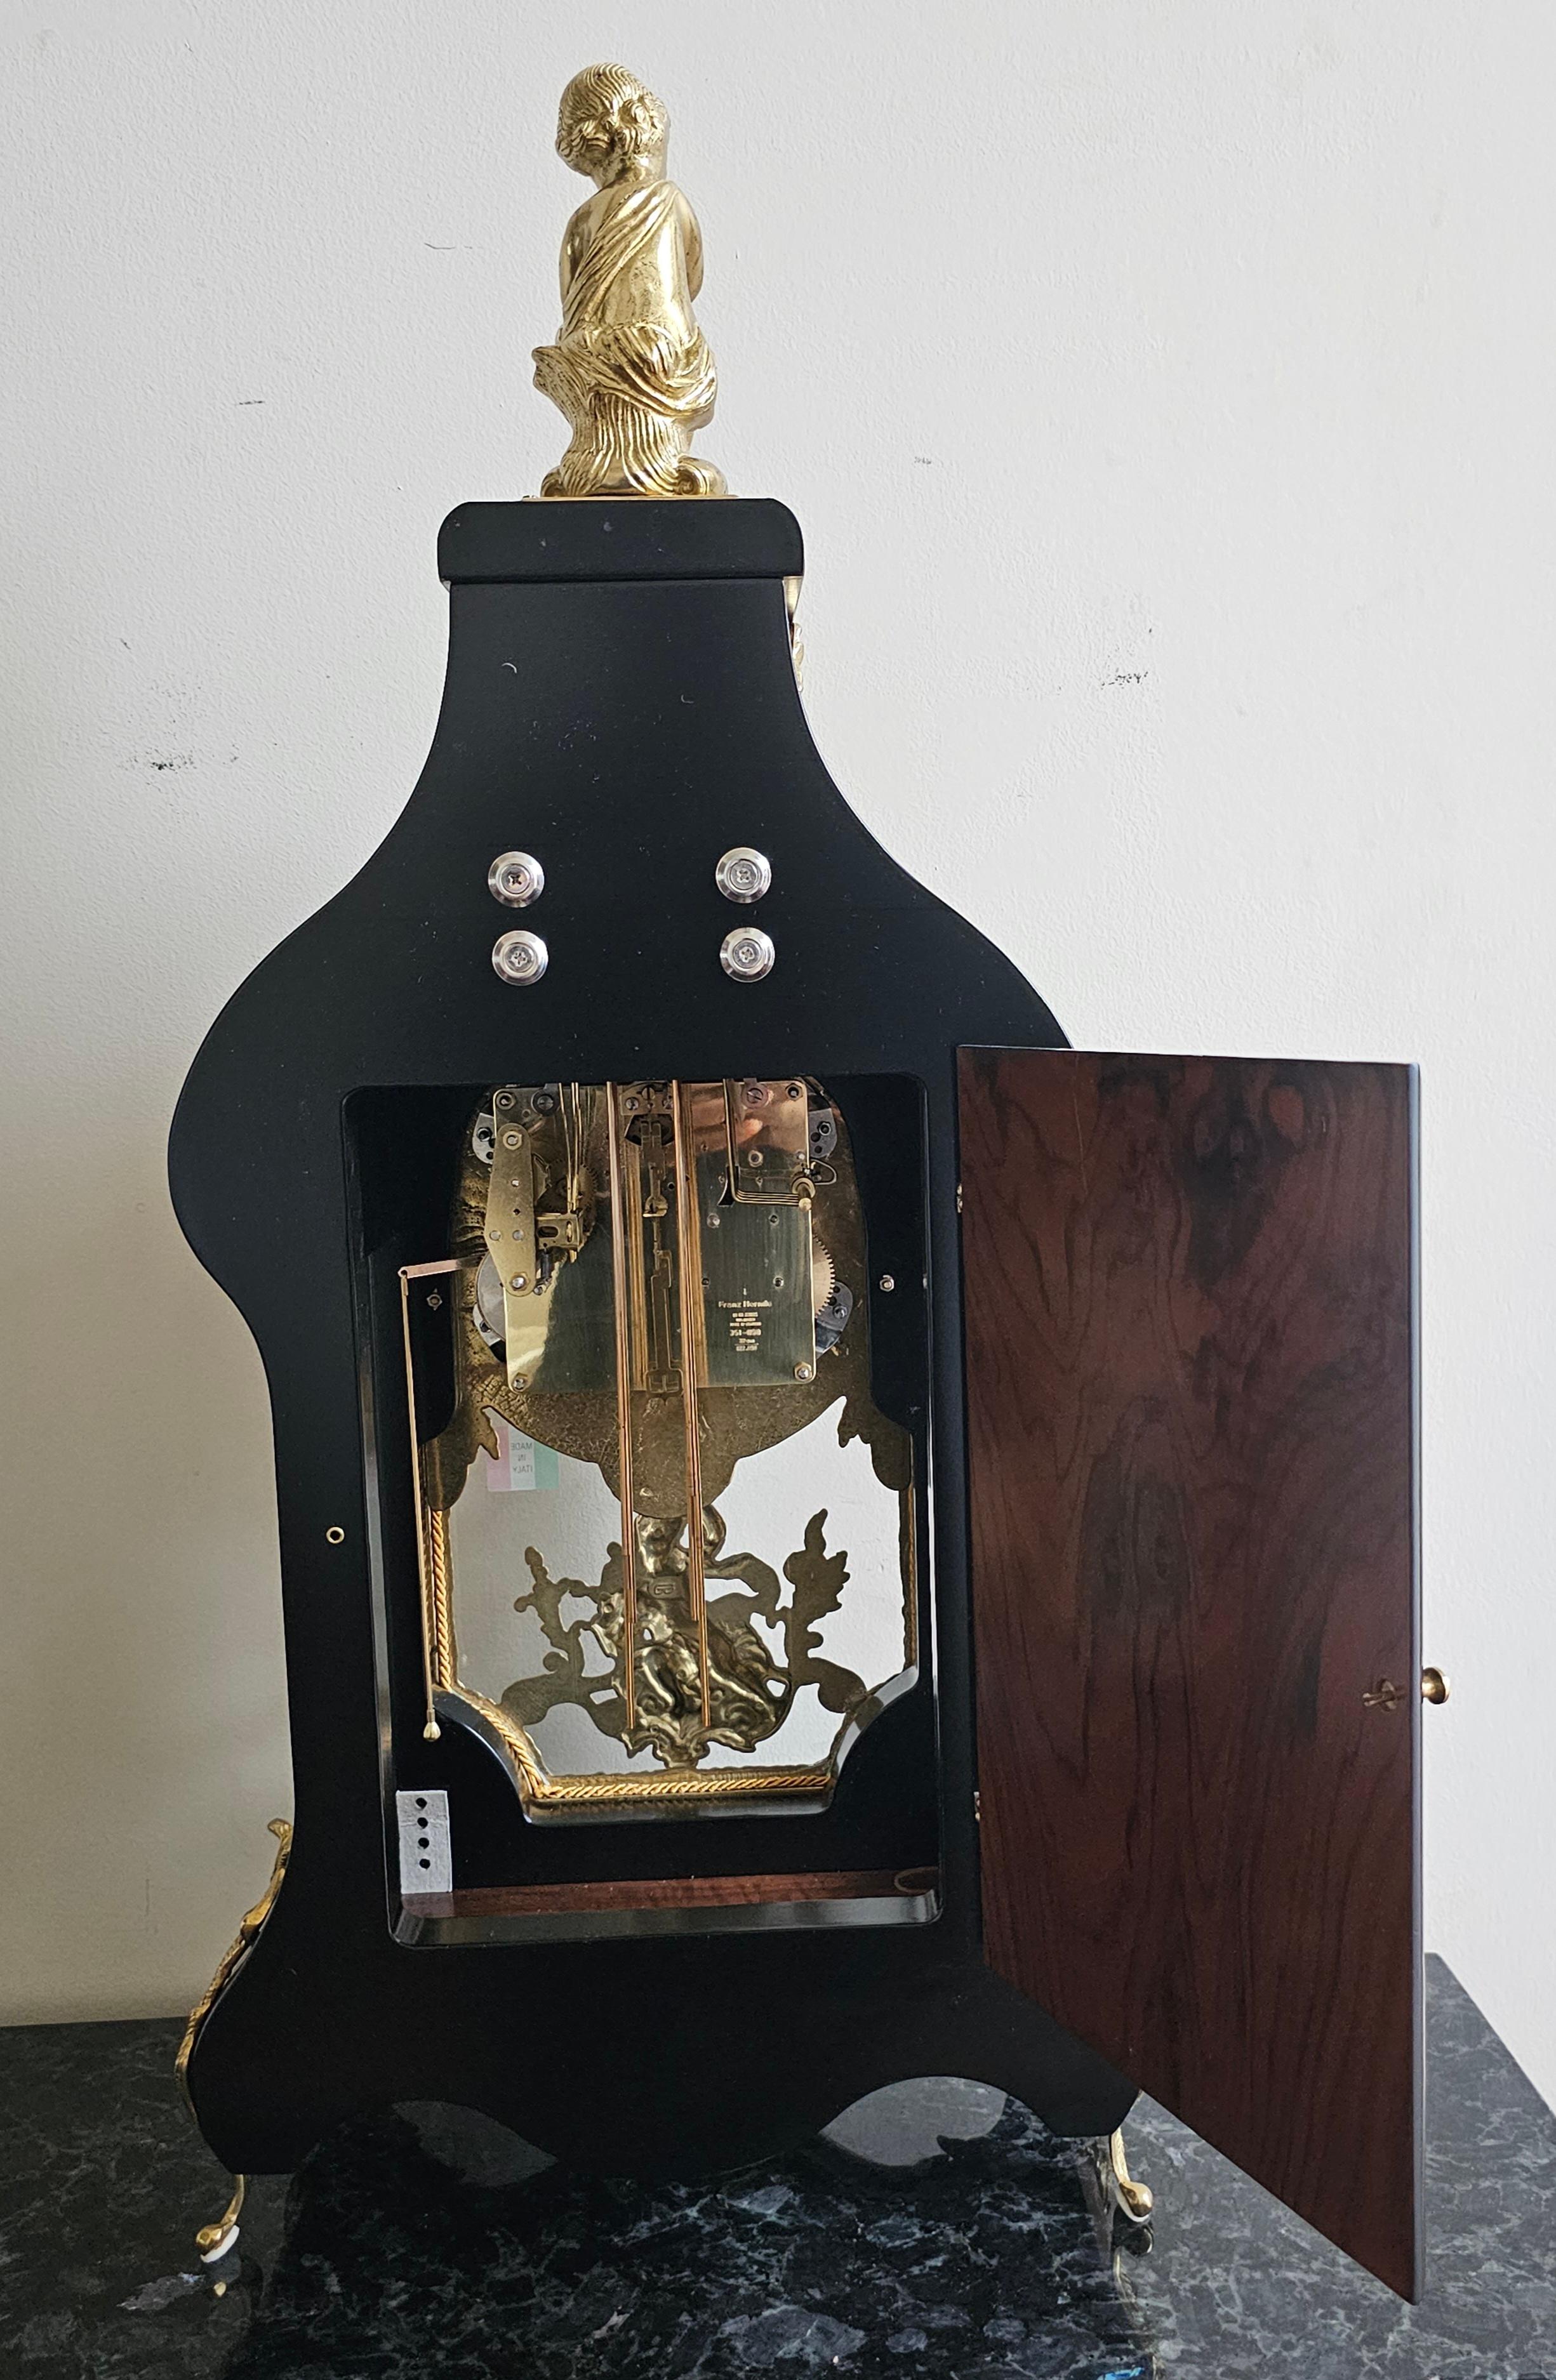 Contemporary New Large Franz Hermle Mantel Clock in DeArt Italian Marquetry and Ormolu Case For Sale